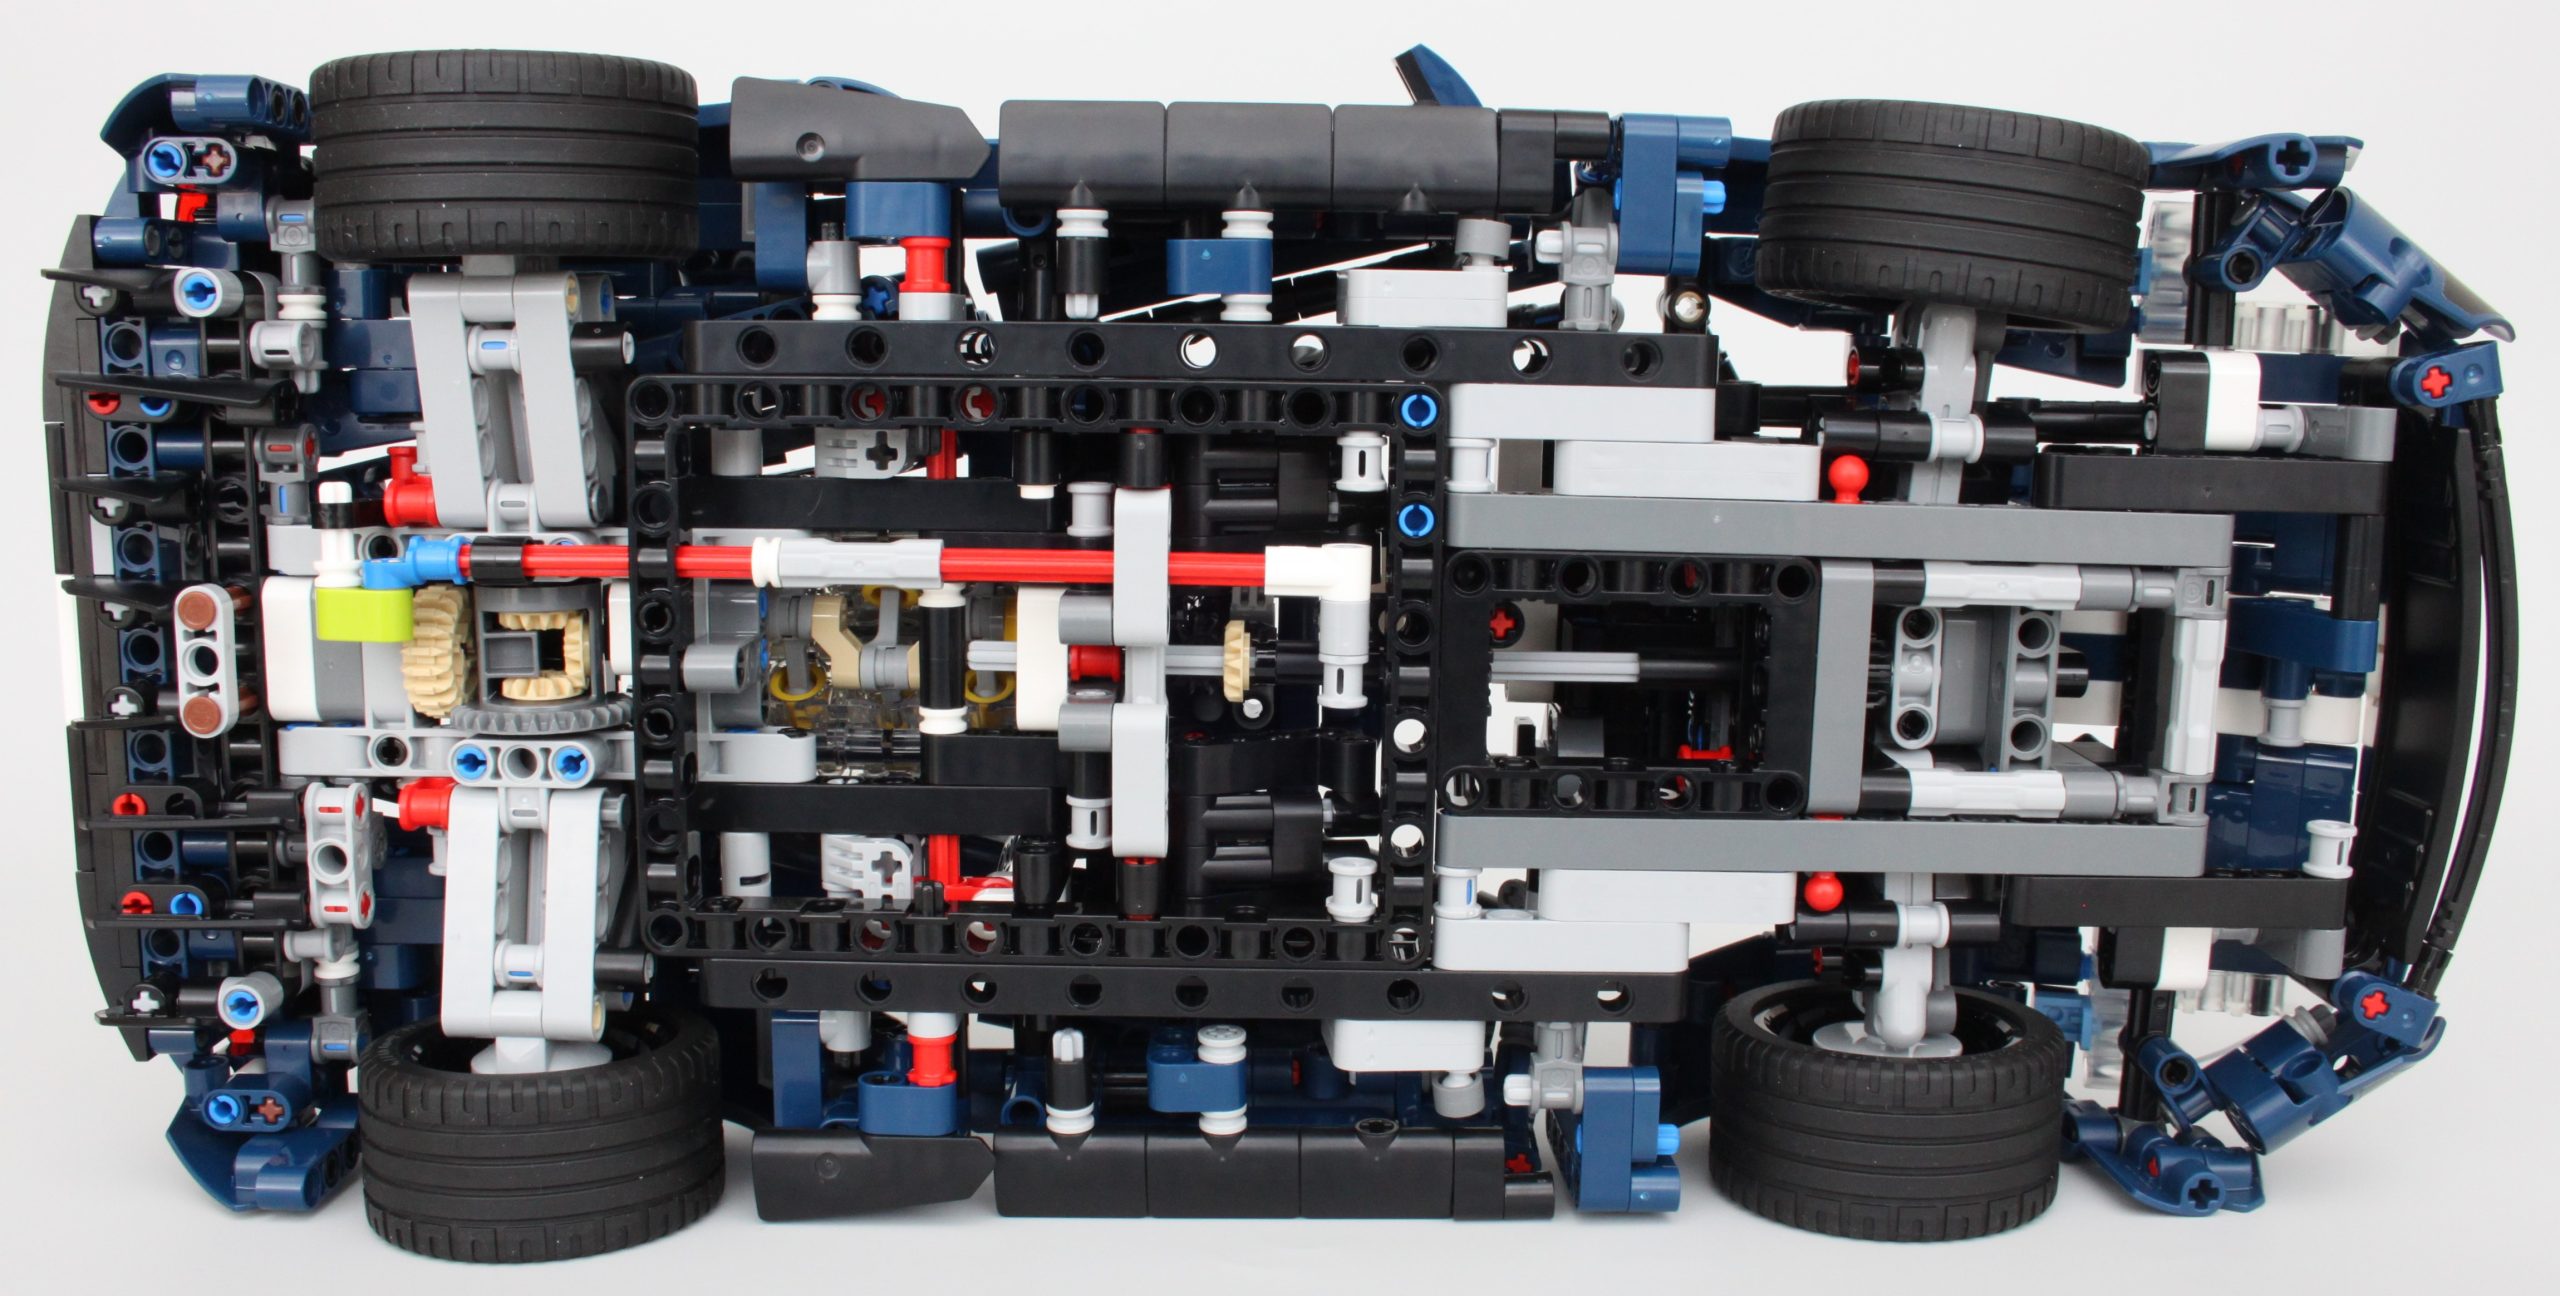 LEGO 42154 Ford GT review